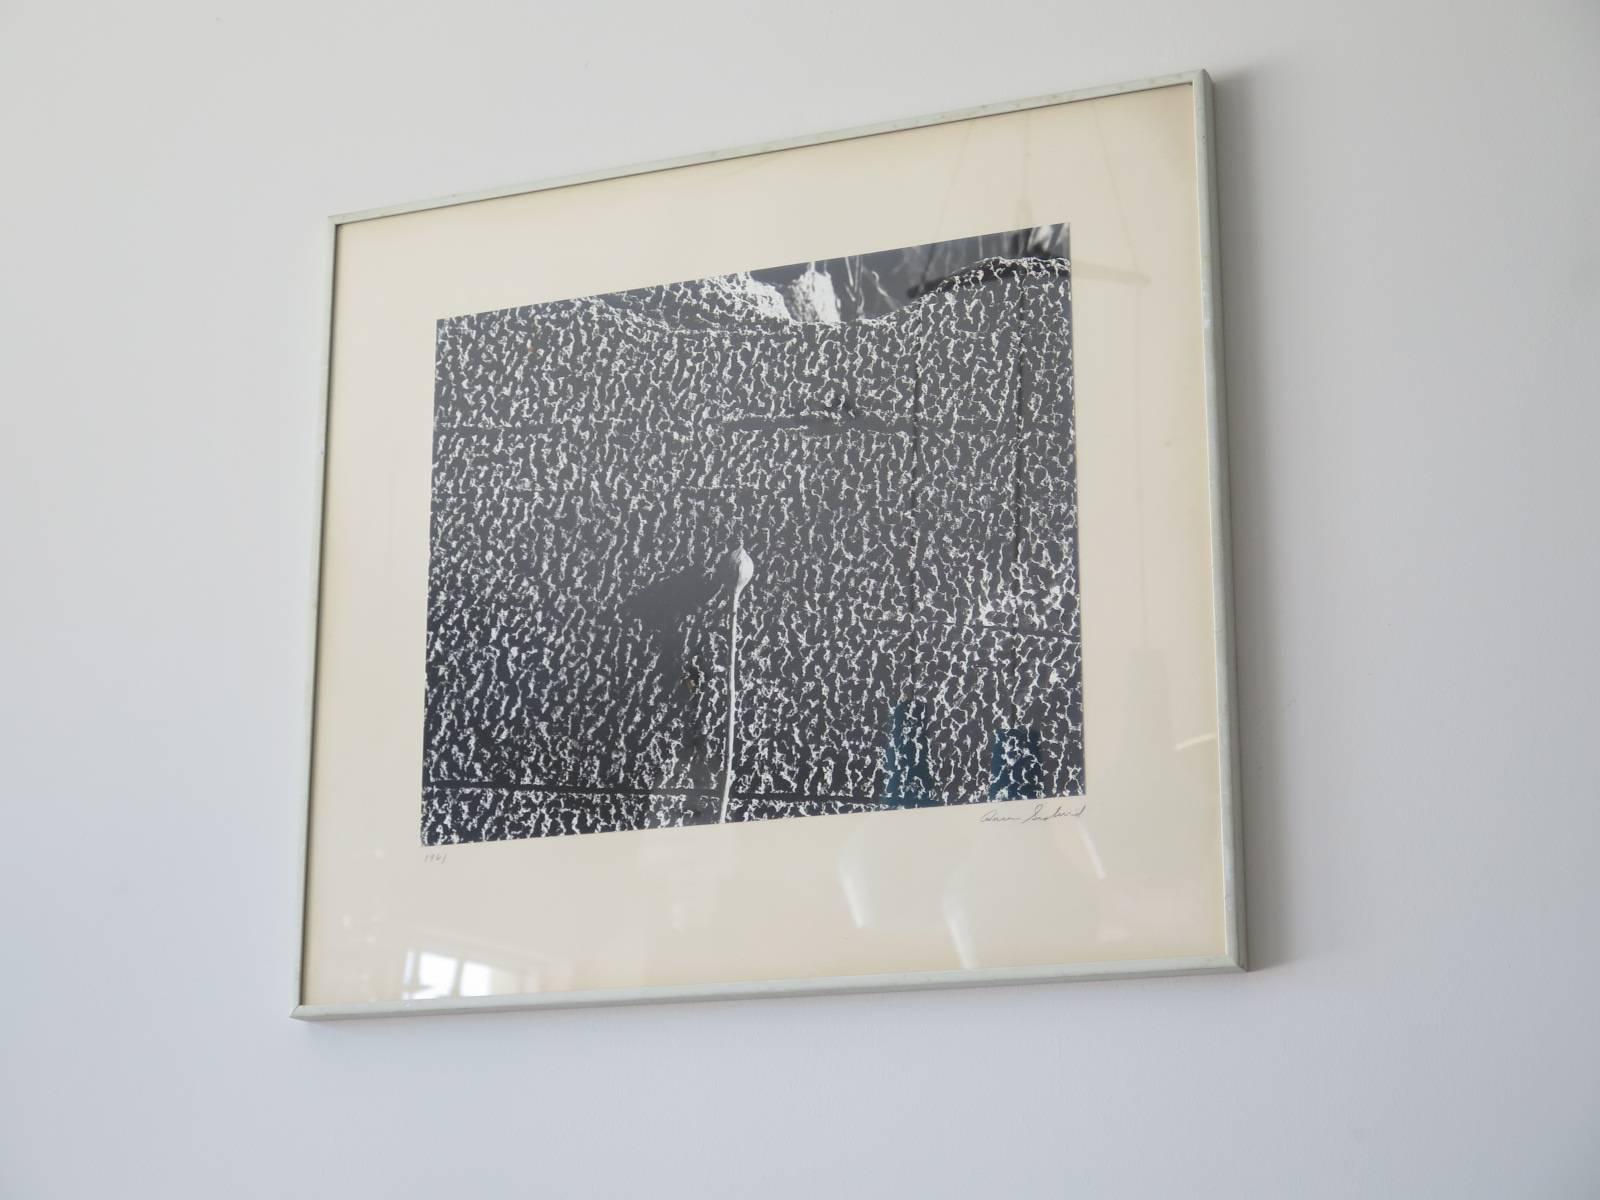 An Aaron Siskind photograph (vintage gelatin silver print, signed and dated 1961.) Titled 